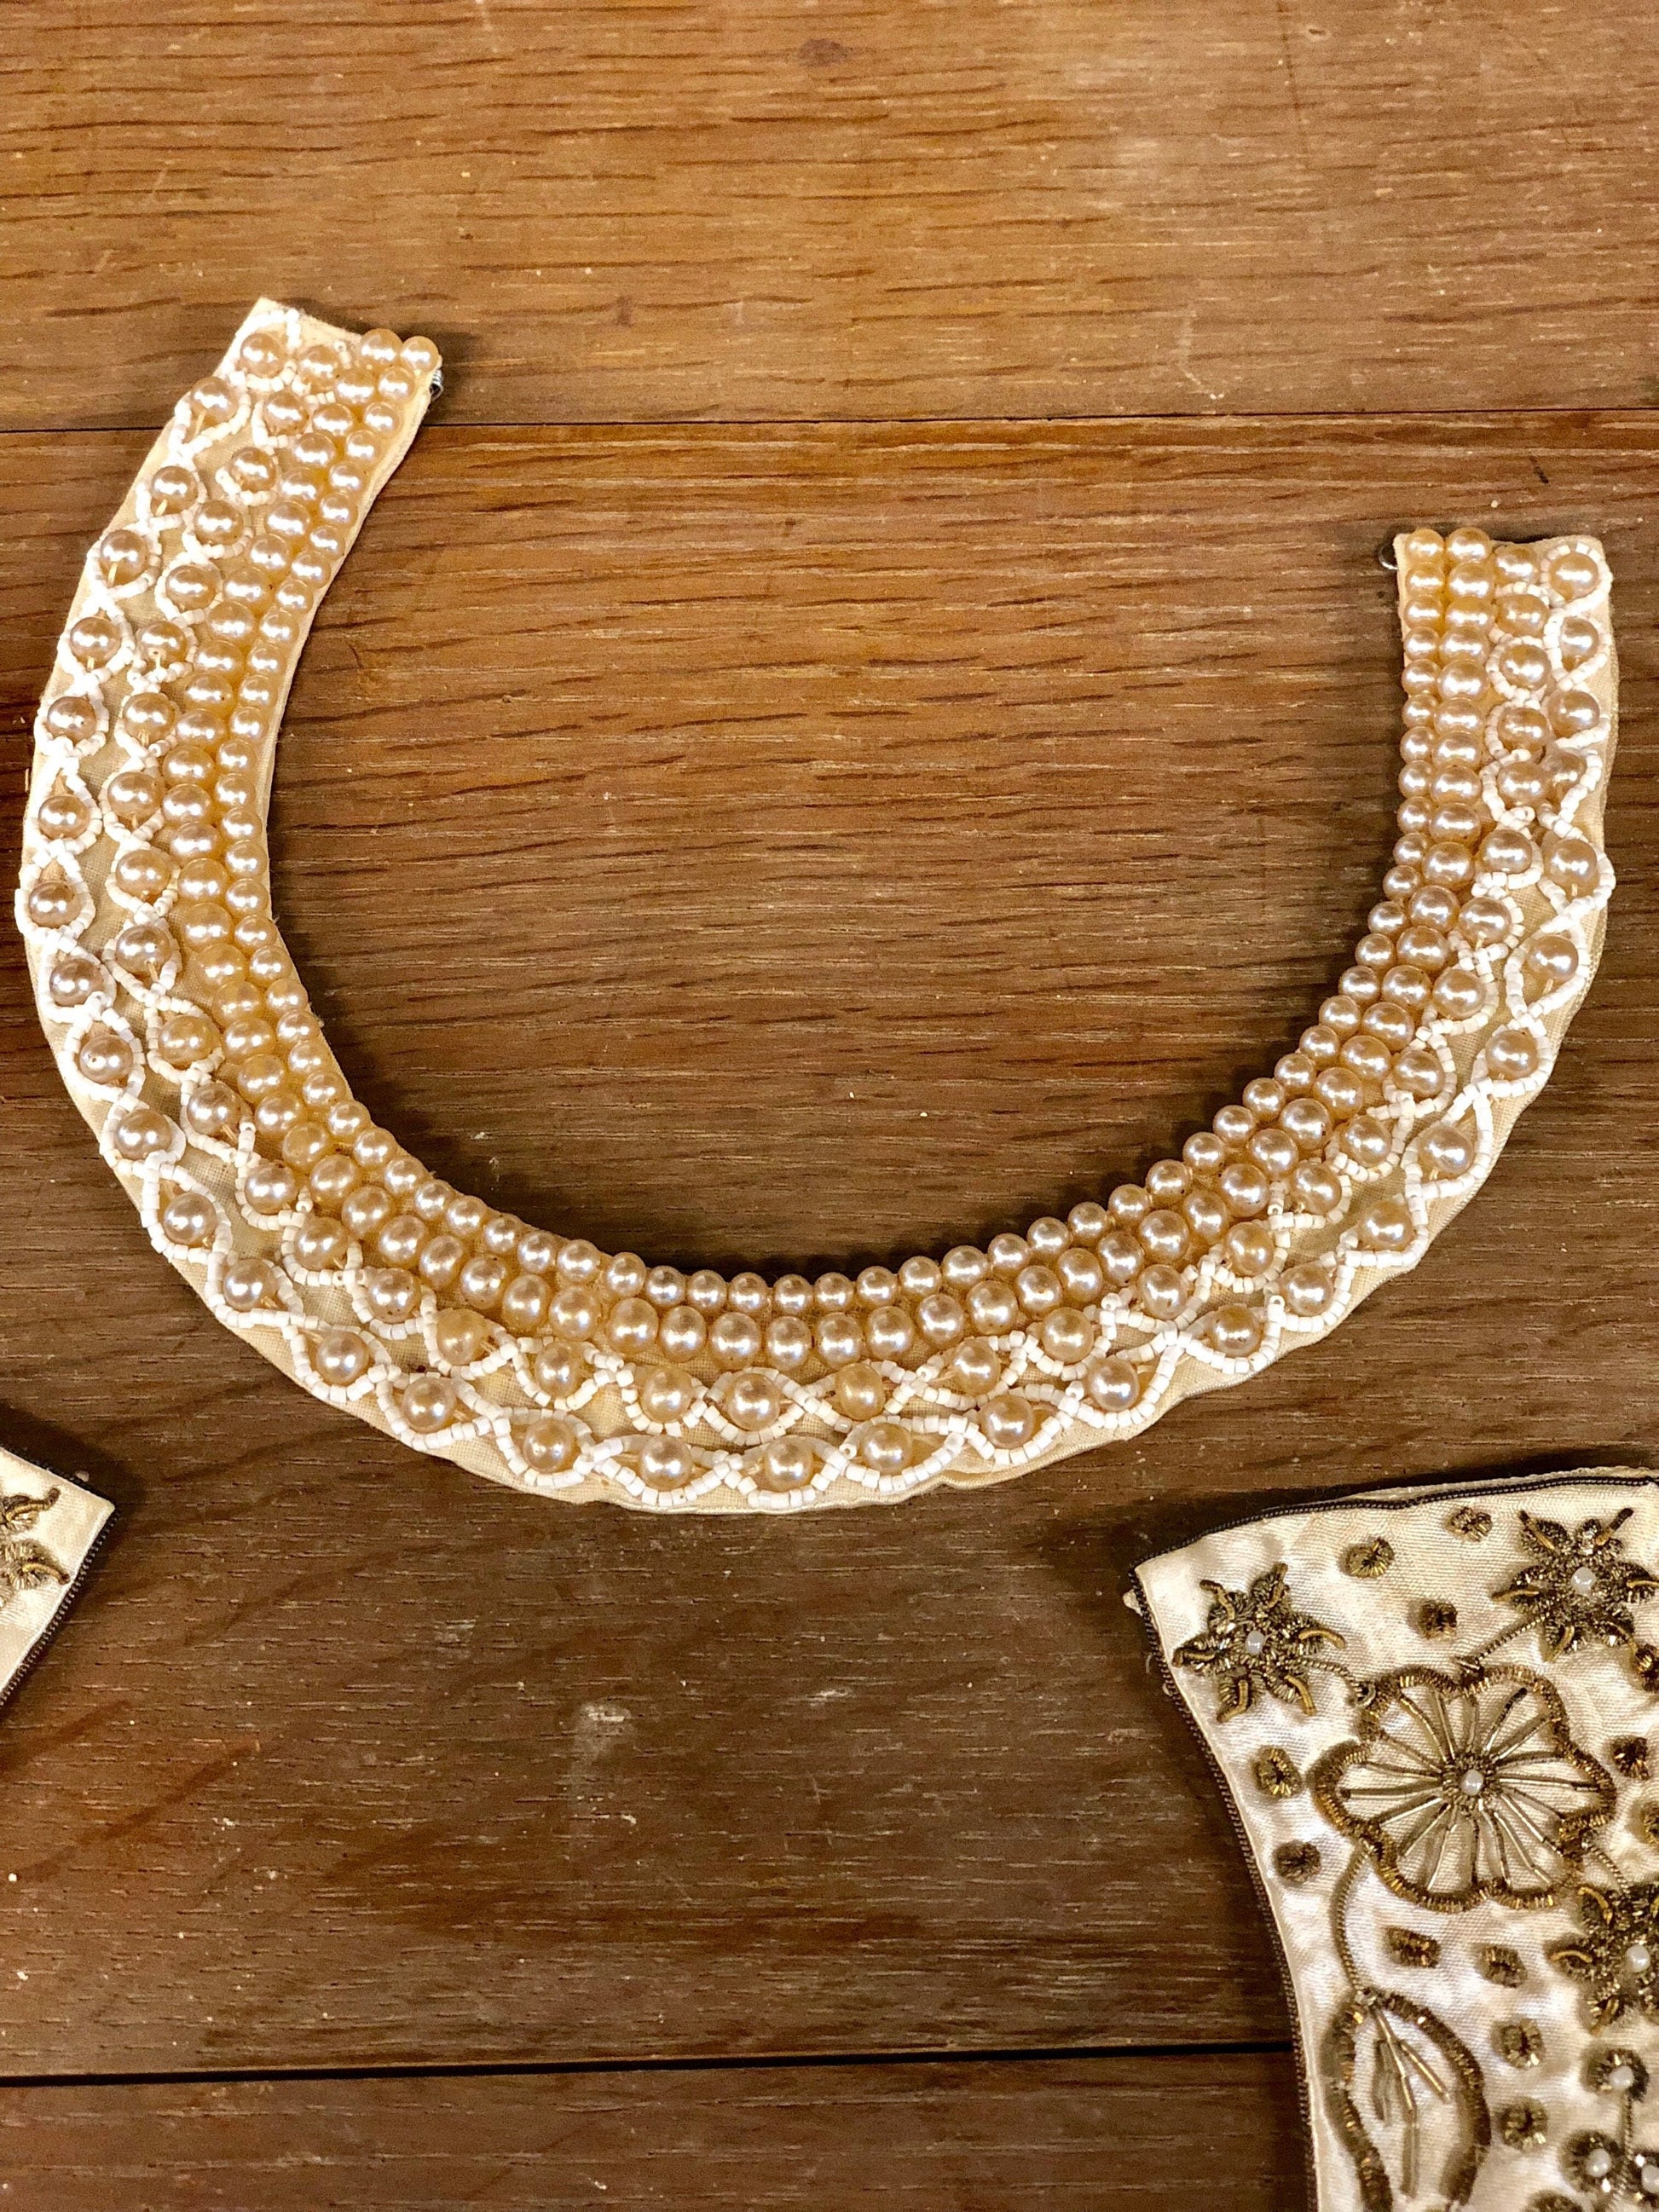 Vintage faux pearl beaded collar on wooden surface